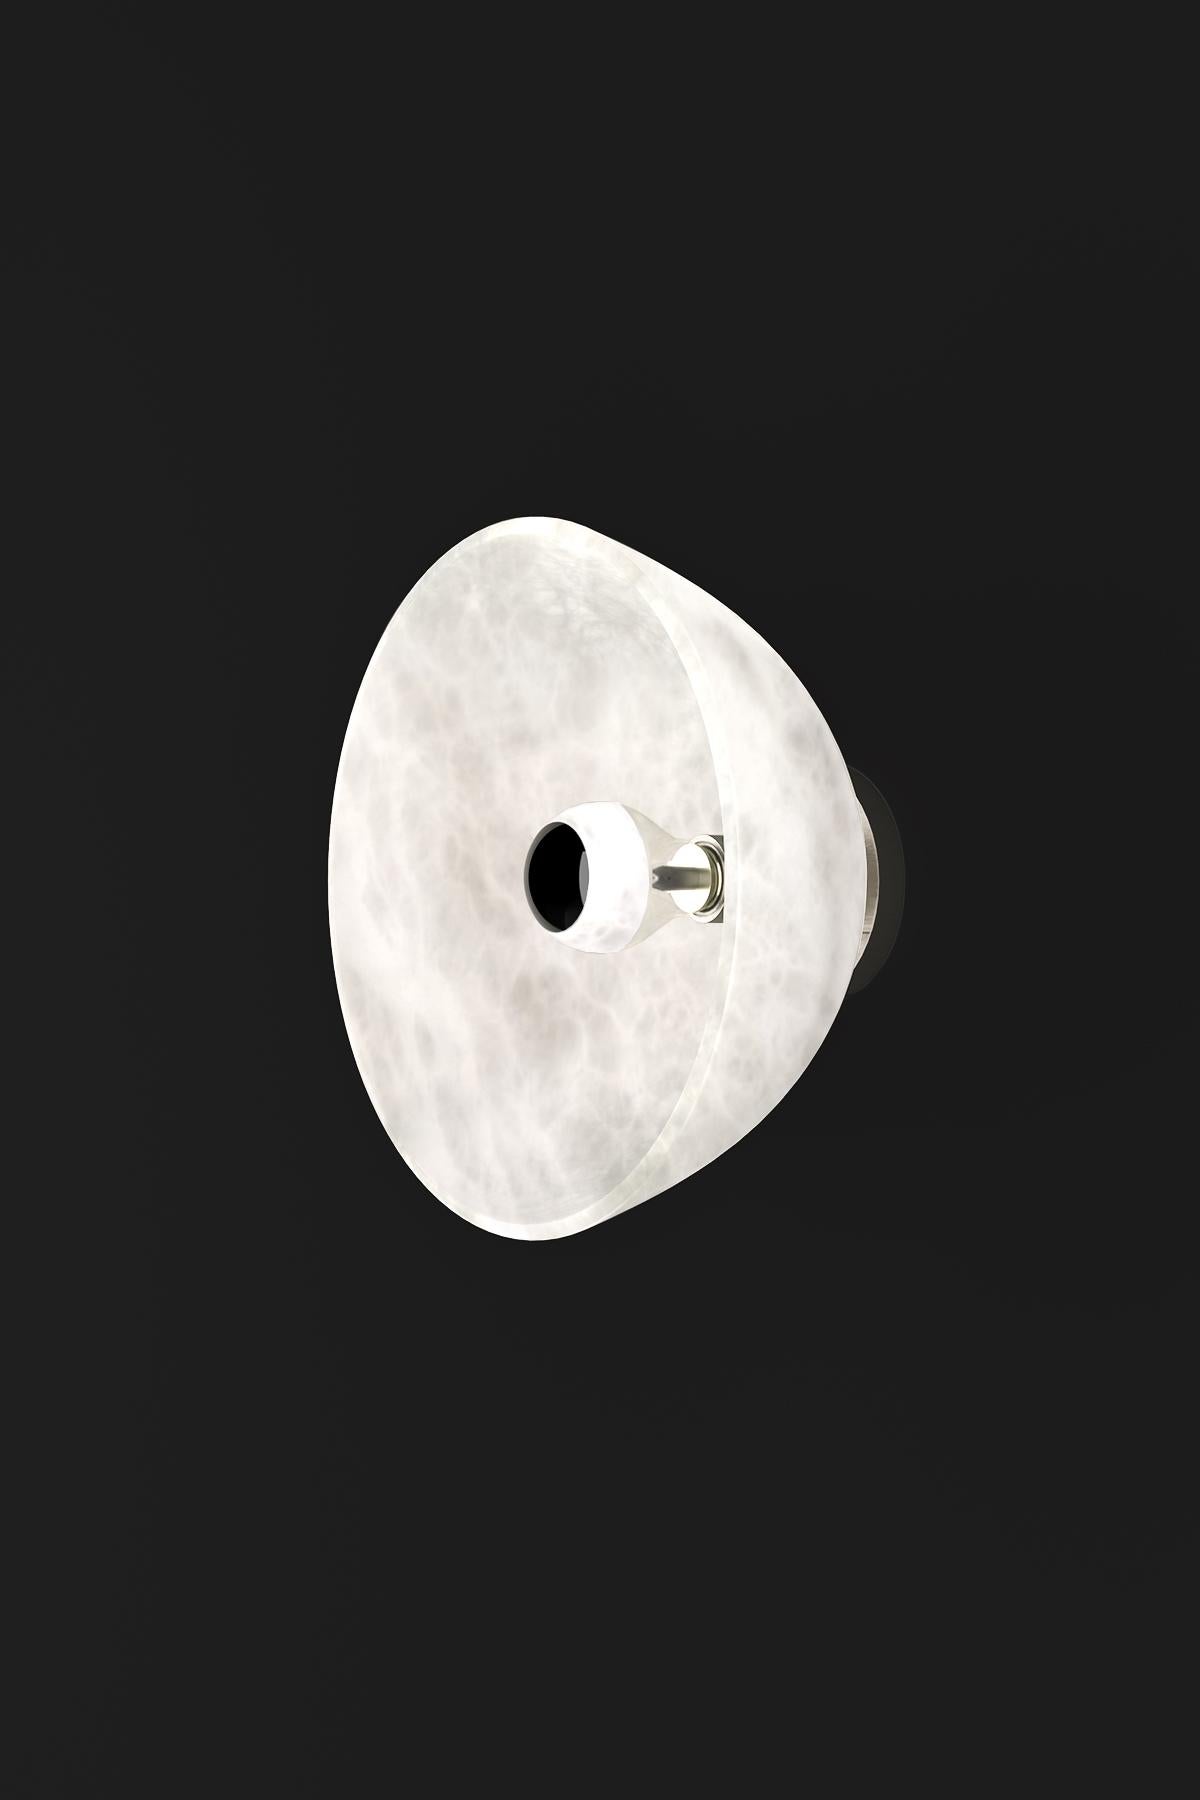 Apollo Brushed Metal Wall Lamp by Alabastro Italiano
Dimensions: Ø 30 x W 17,5 cm.
Materials: White alabaster and metal.

Available in different finishes: Shiny Silver, Bronze, Brushed Brass, Ruggine of Florence, Brushed Burnished, Shiny Gold,